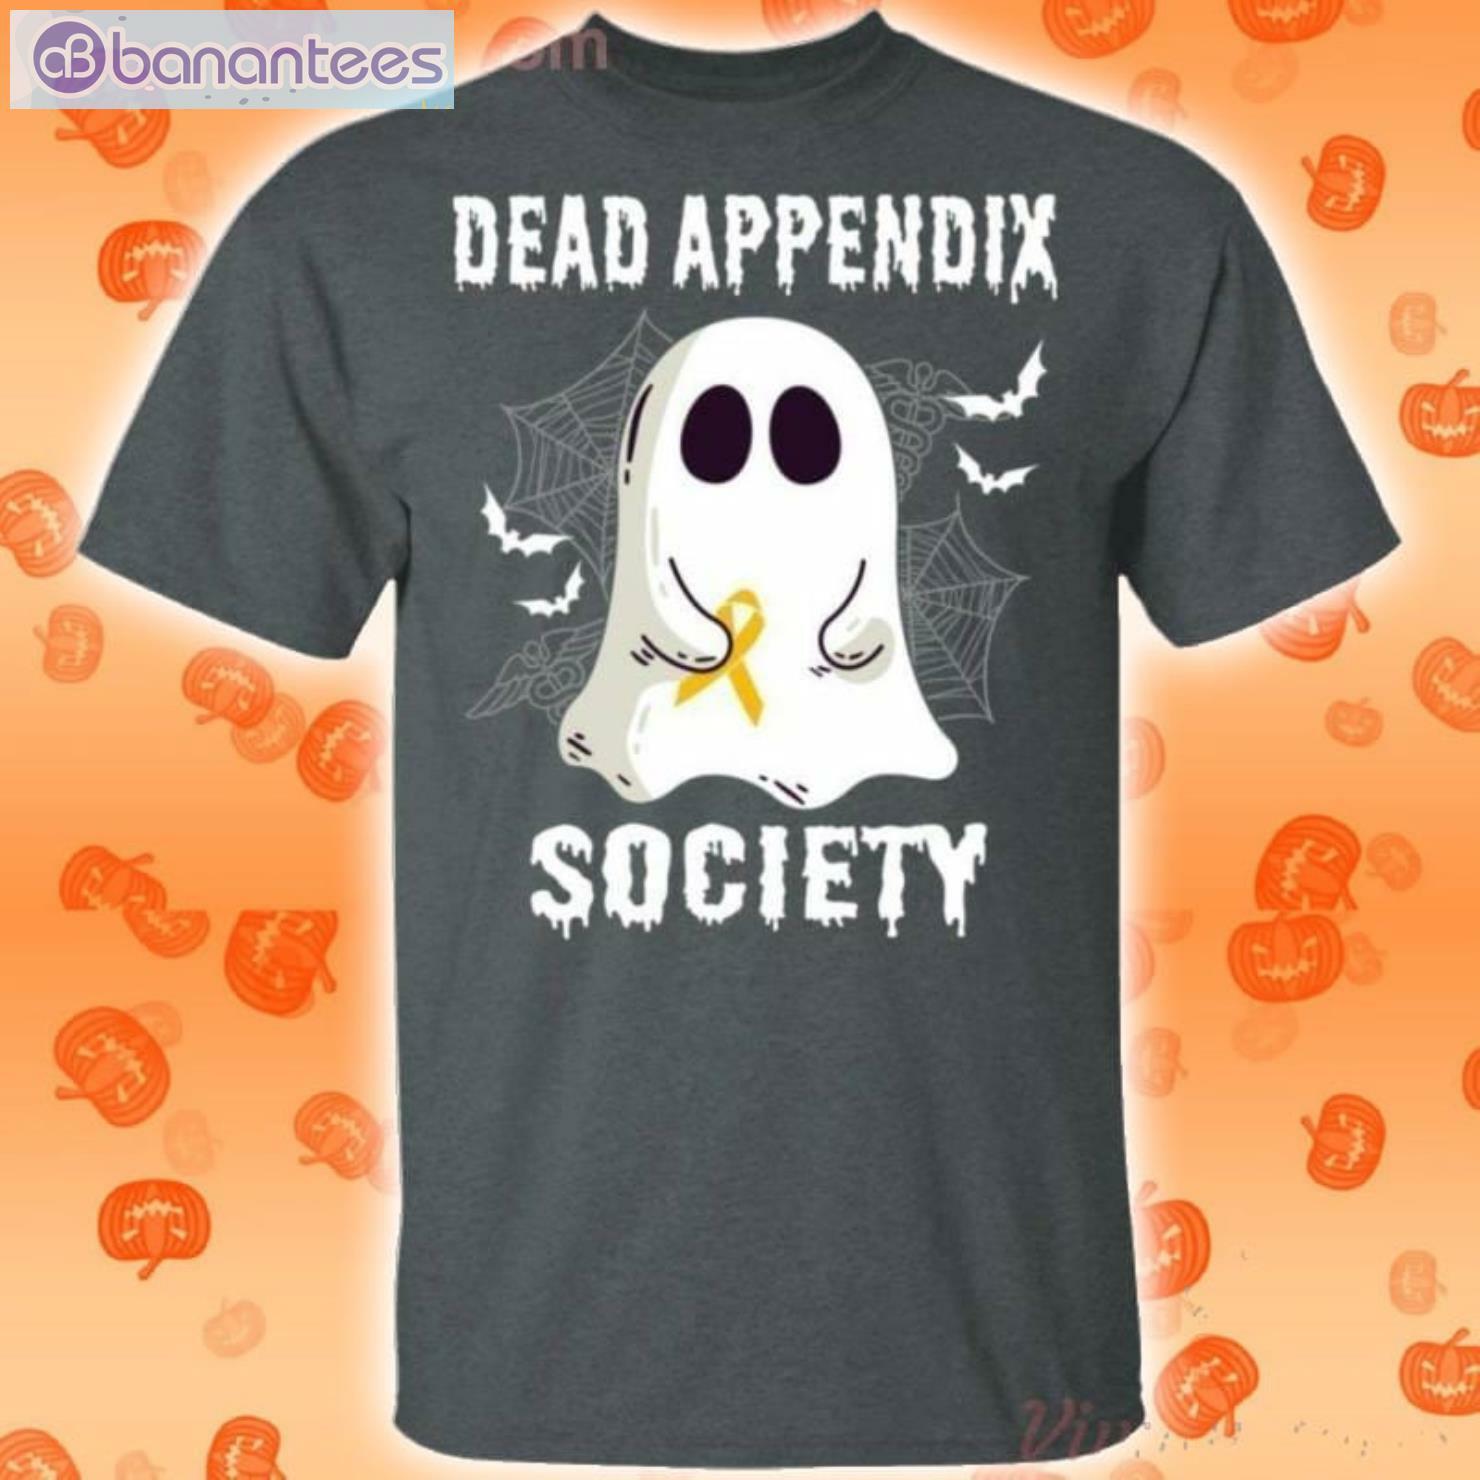 Dead Appendix Society Boo Ghost Halloween Funny T-Shirt Product Photo 2 Product photo 2